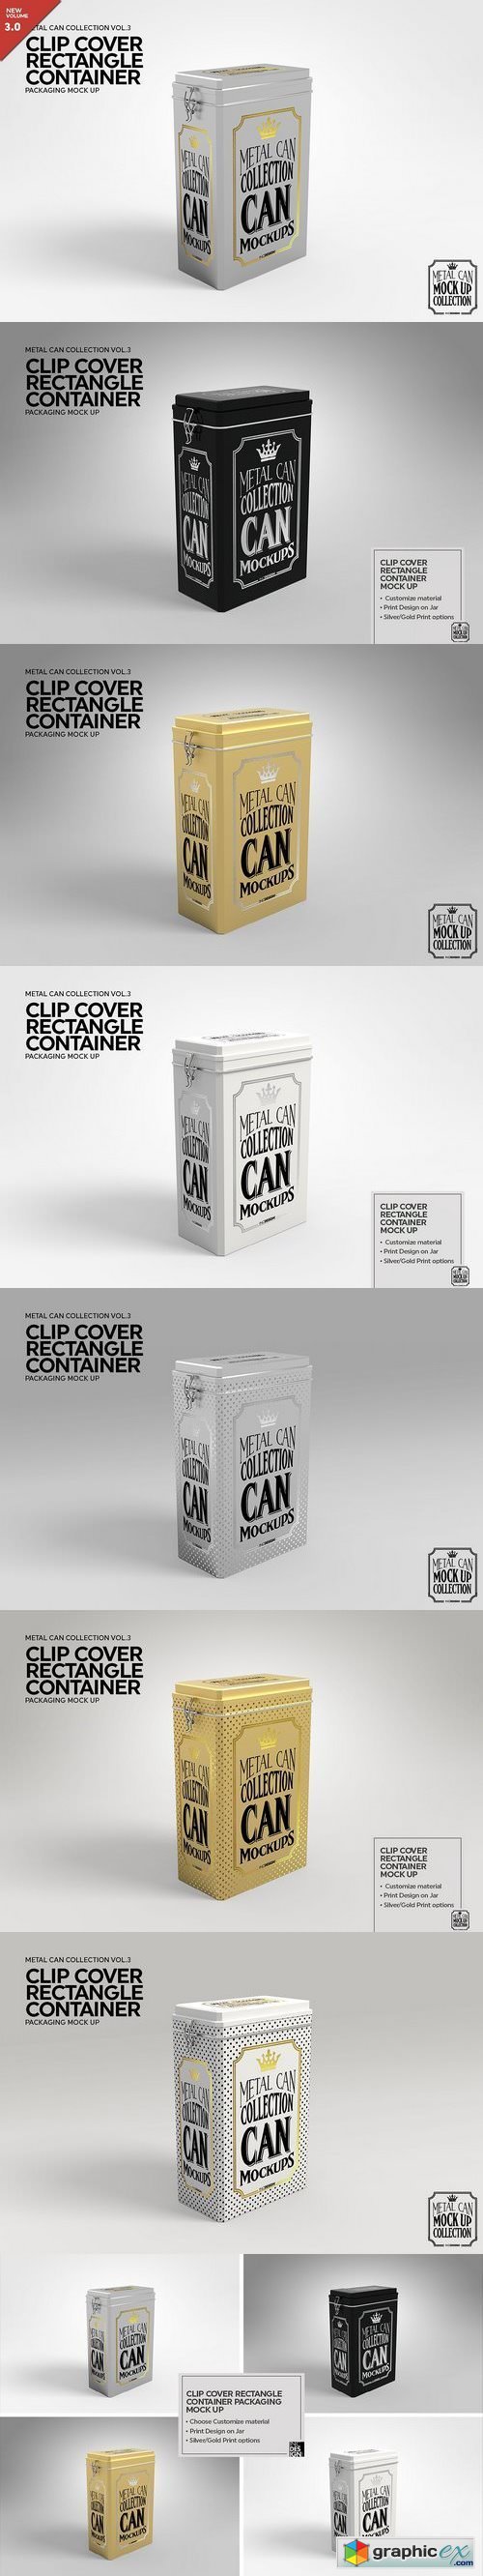 ClipCover Rectangle Container MockUp